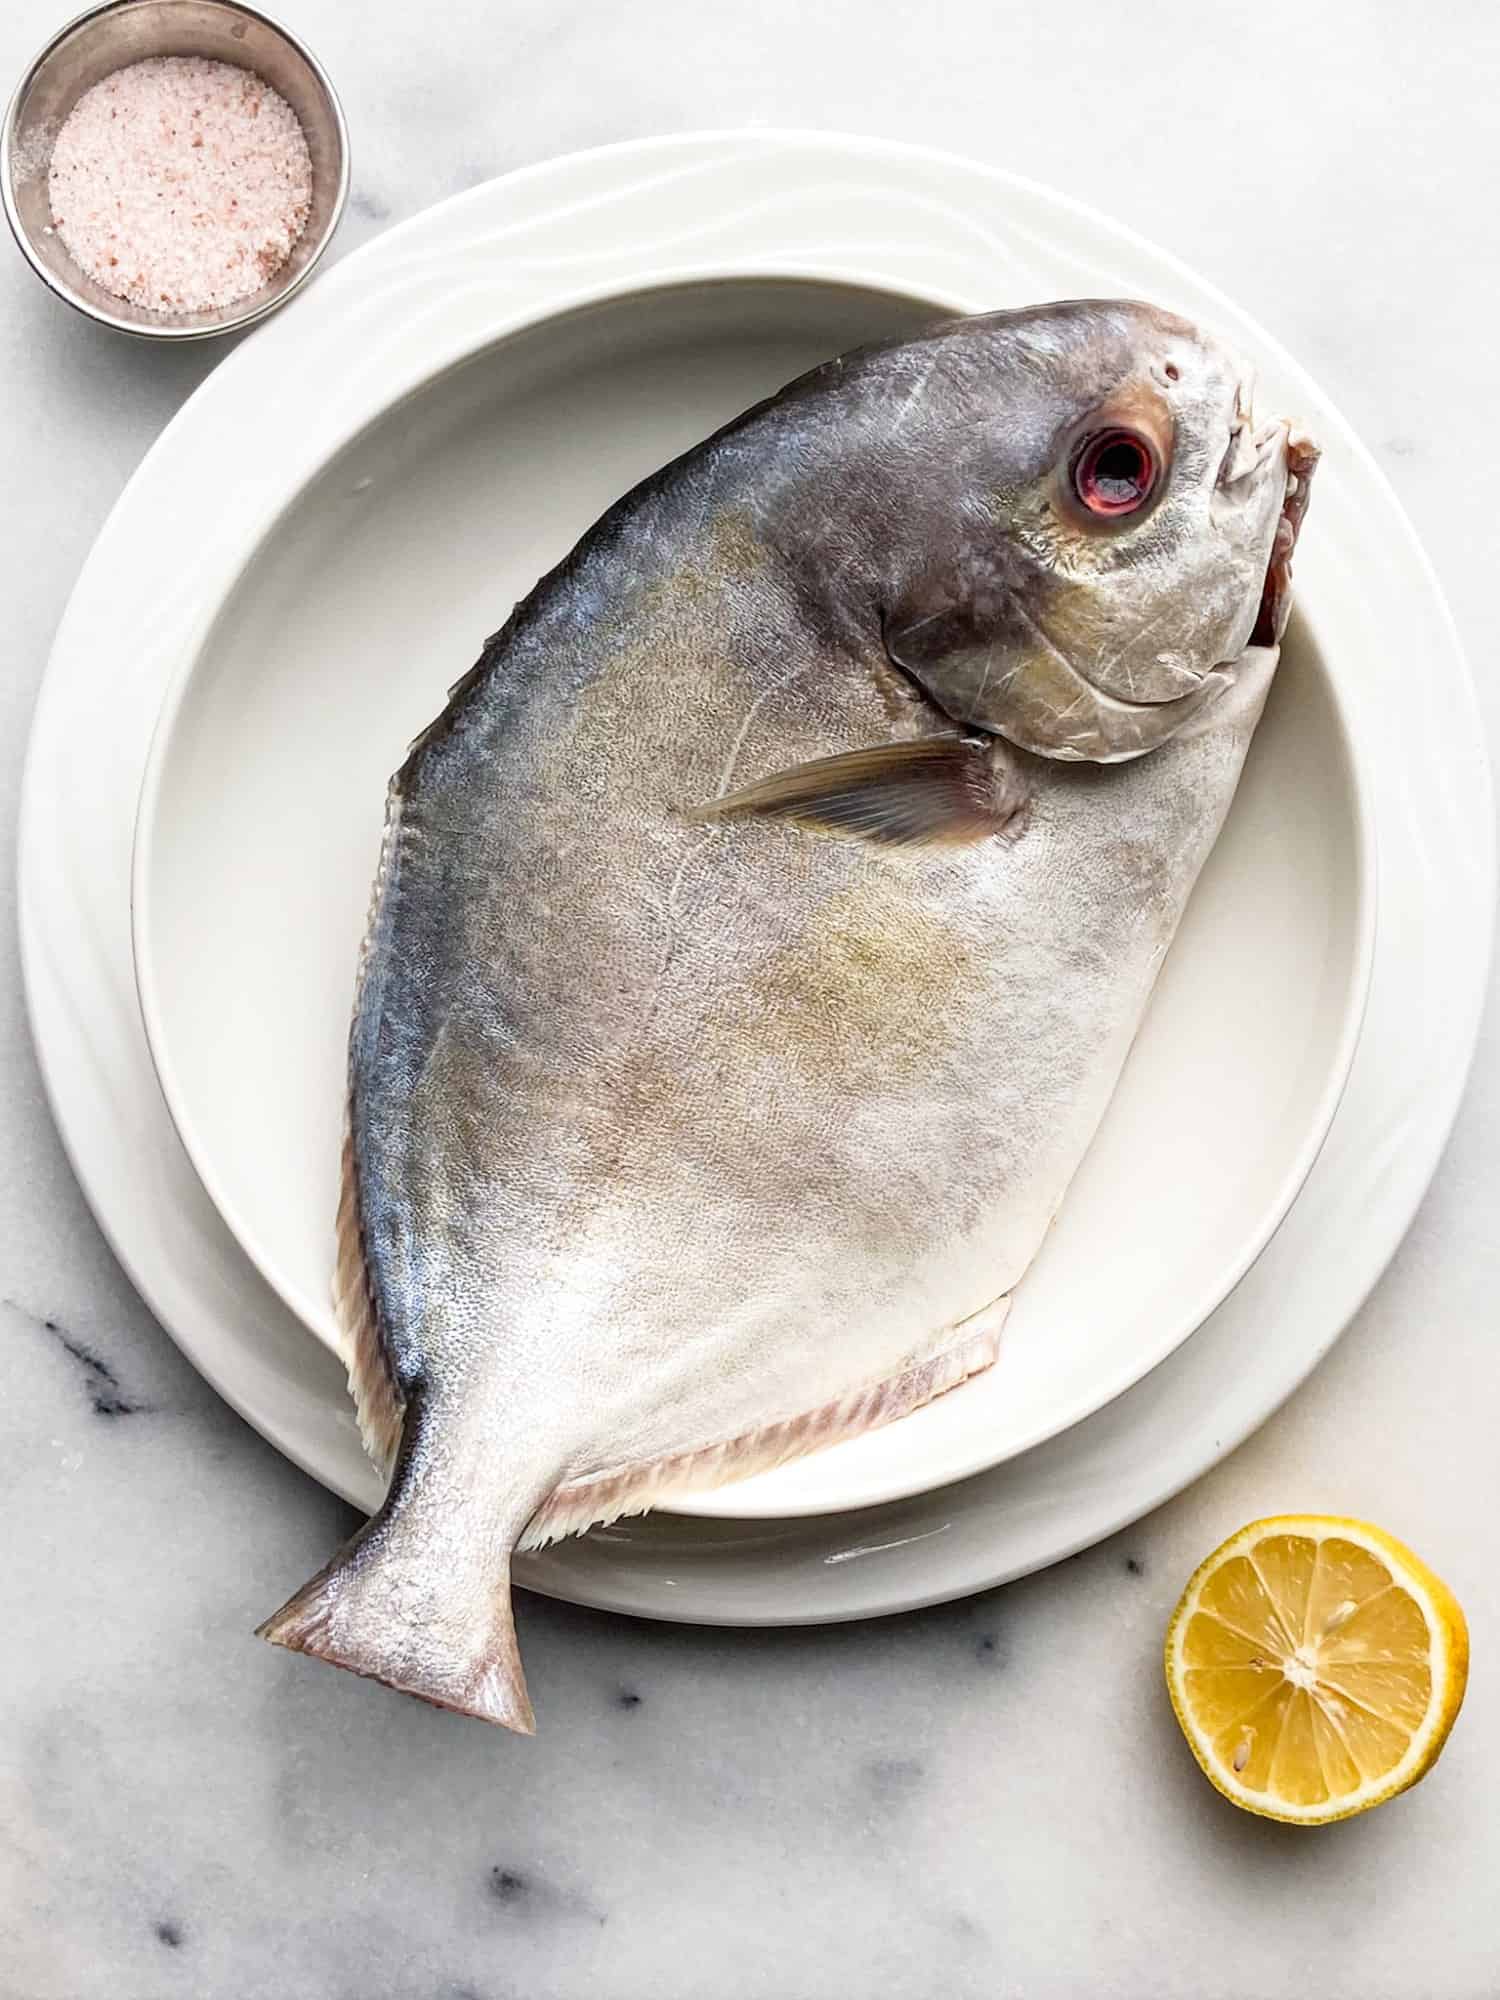 Pompano also known as pomfret fish 